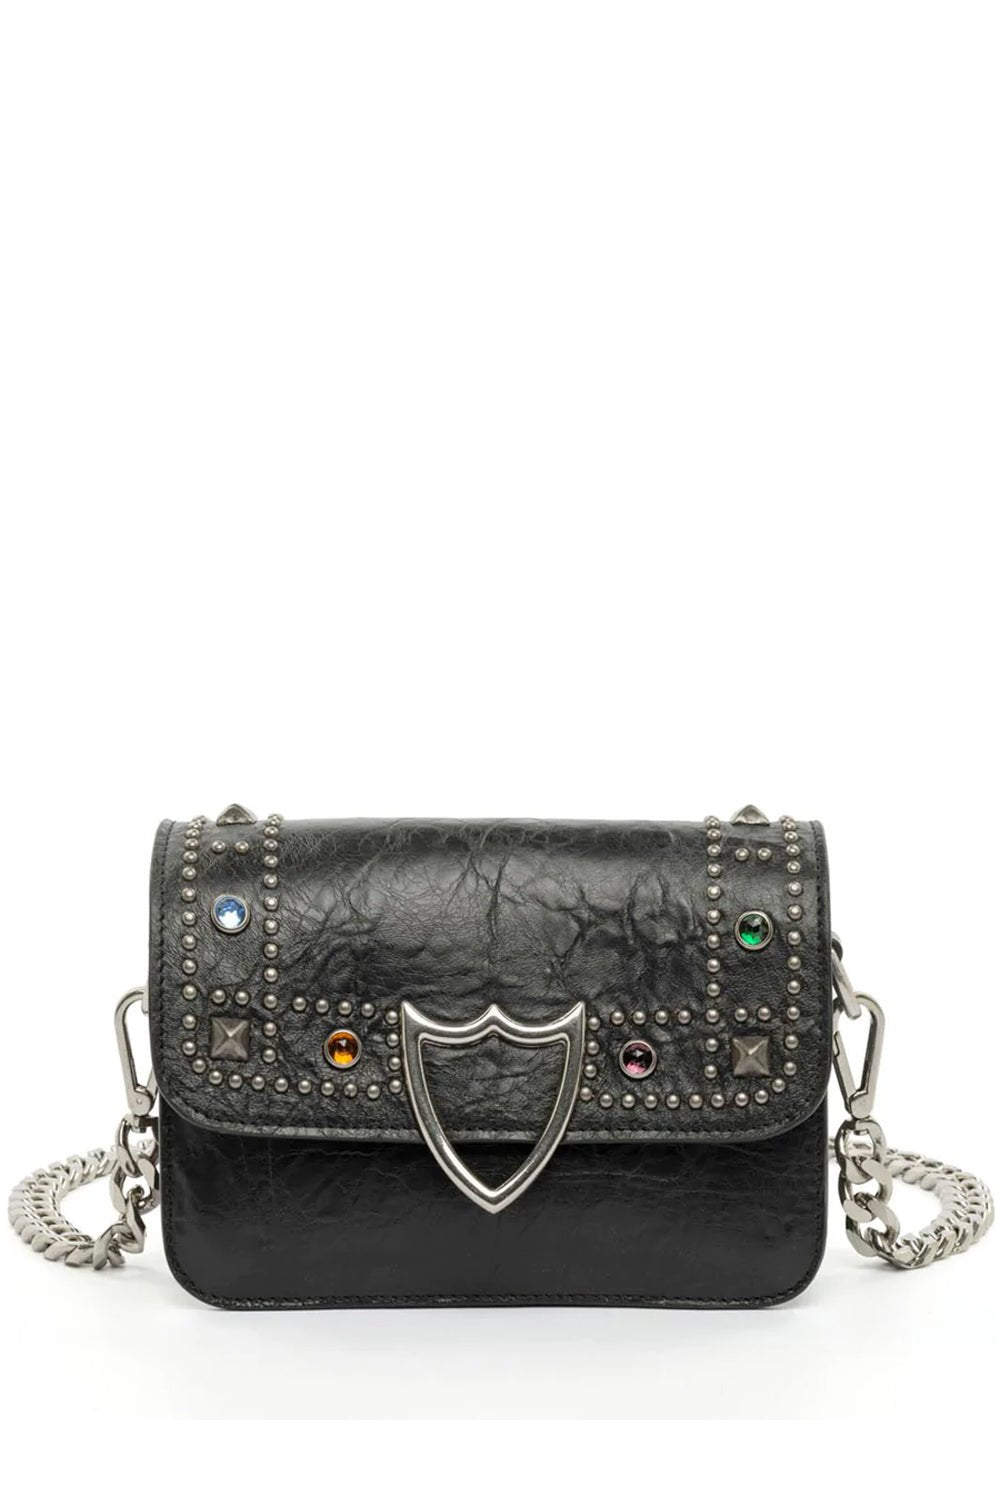 L.A. TROUBADOUR MED BAG Black leather mini bag. Front studded flap with snap button closure. Front silver colored metal logo detail. Studs and rhinestones outline on the front.One internal patch pocket. Leather lining. Shoulder leather strap and metal cha